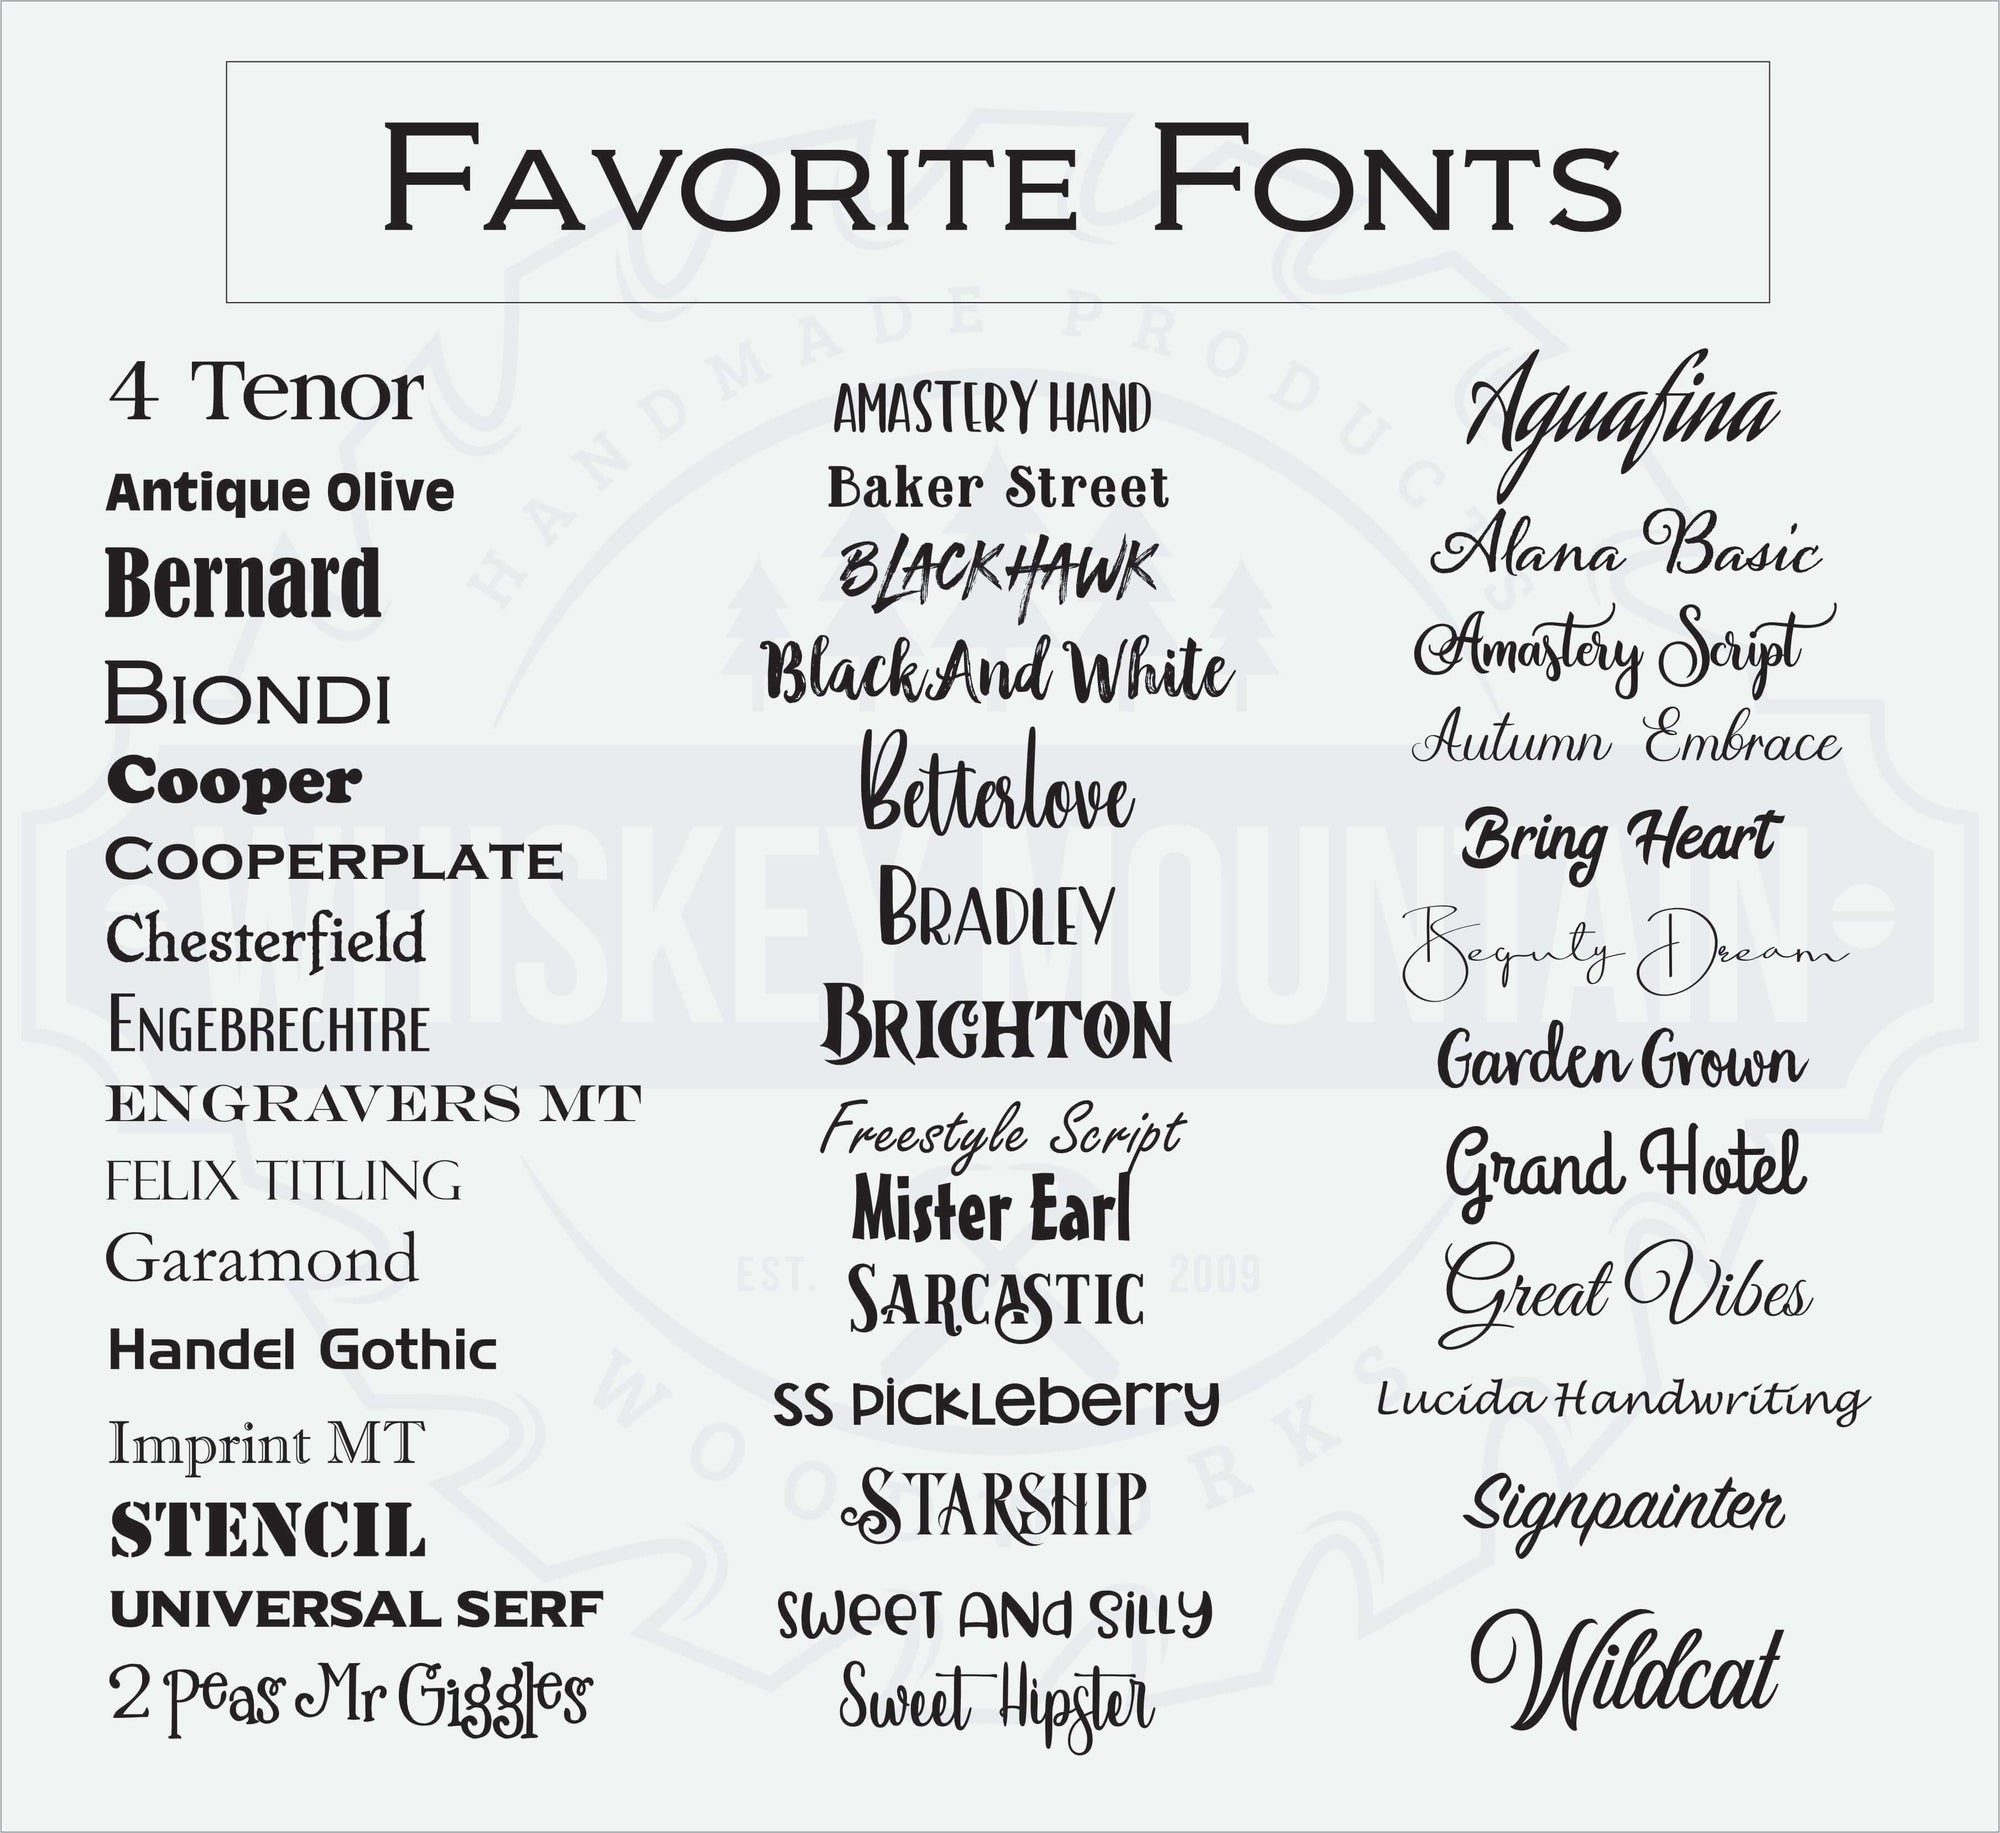 Photo displaying favorite fonts that are available for laser engraving on Yeti and Polar Camel tumblers